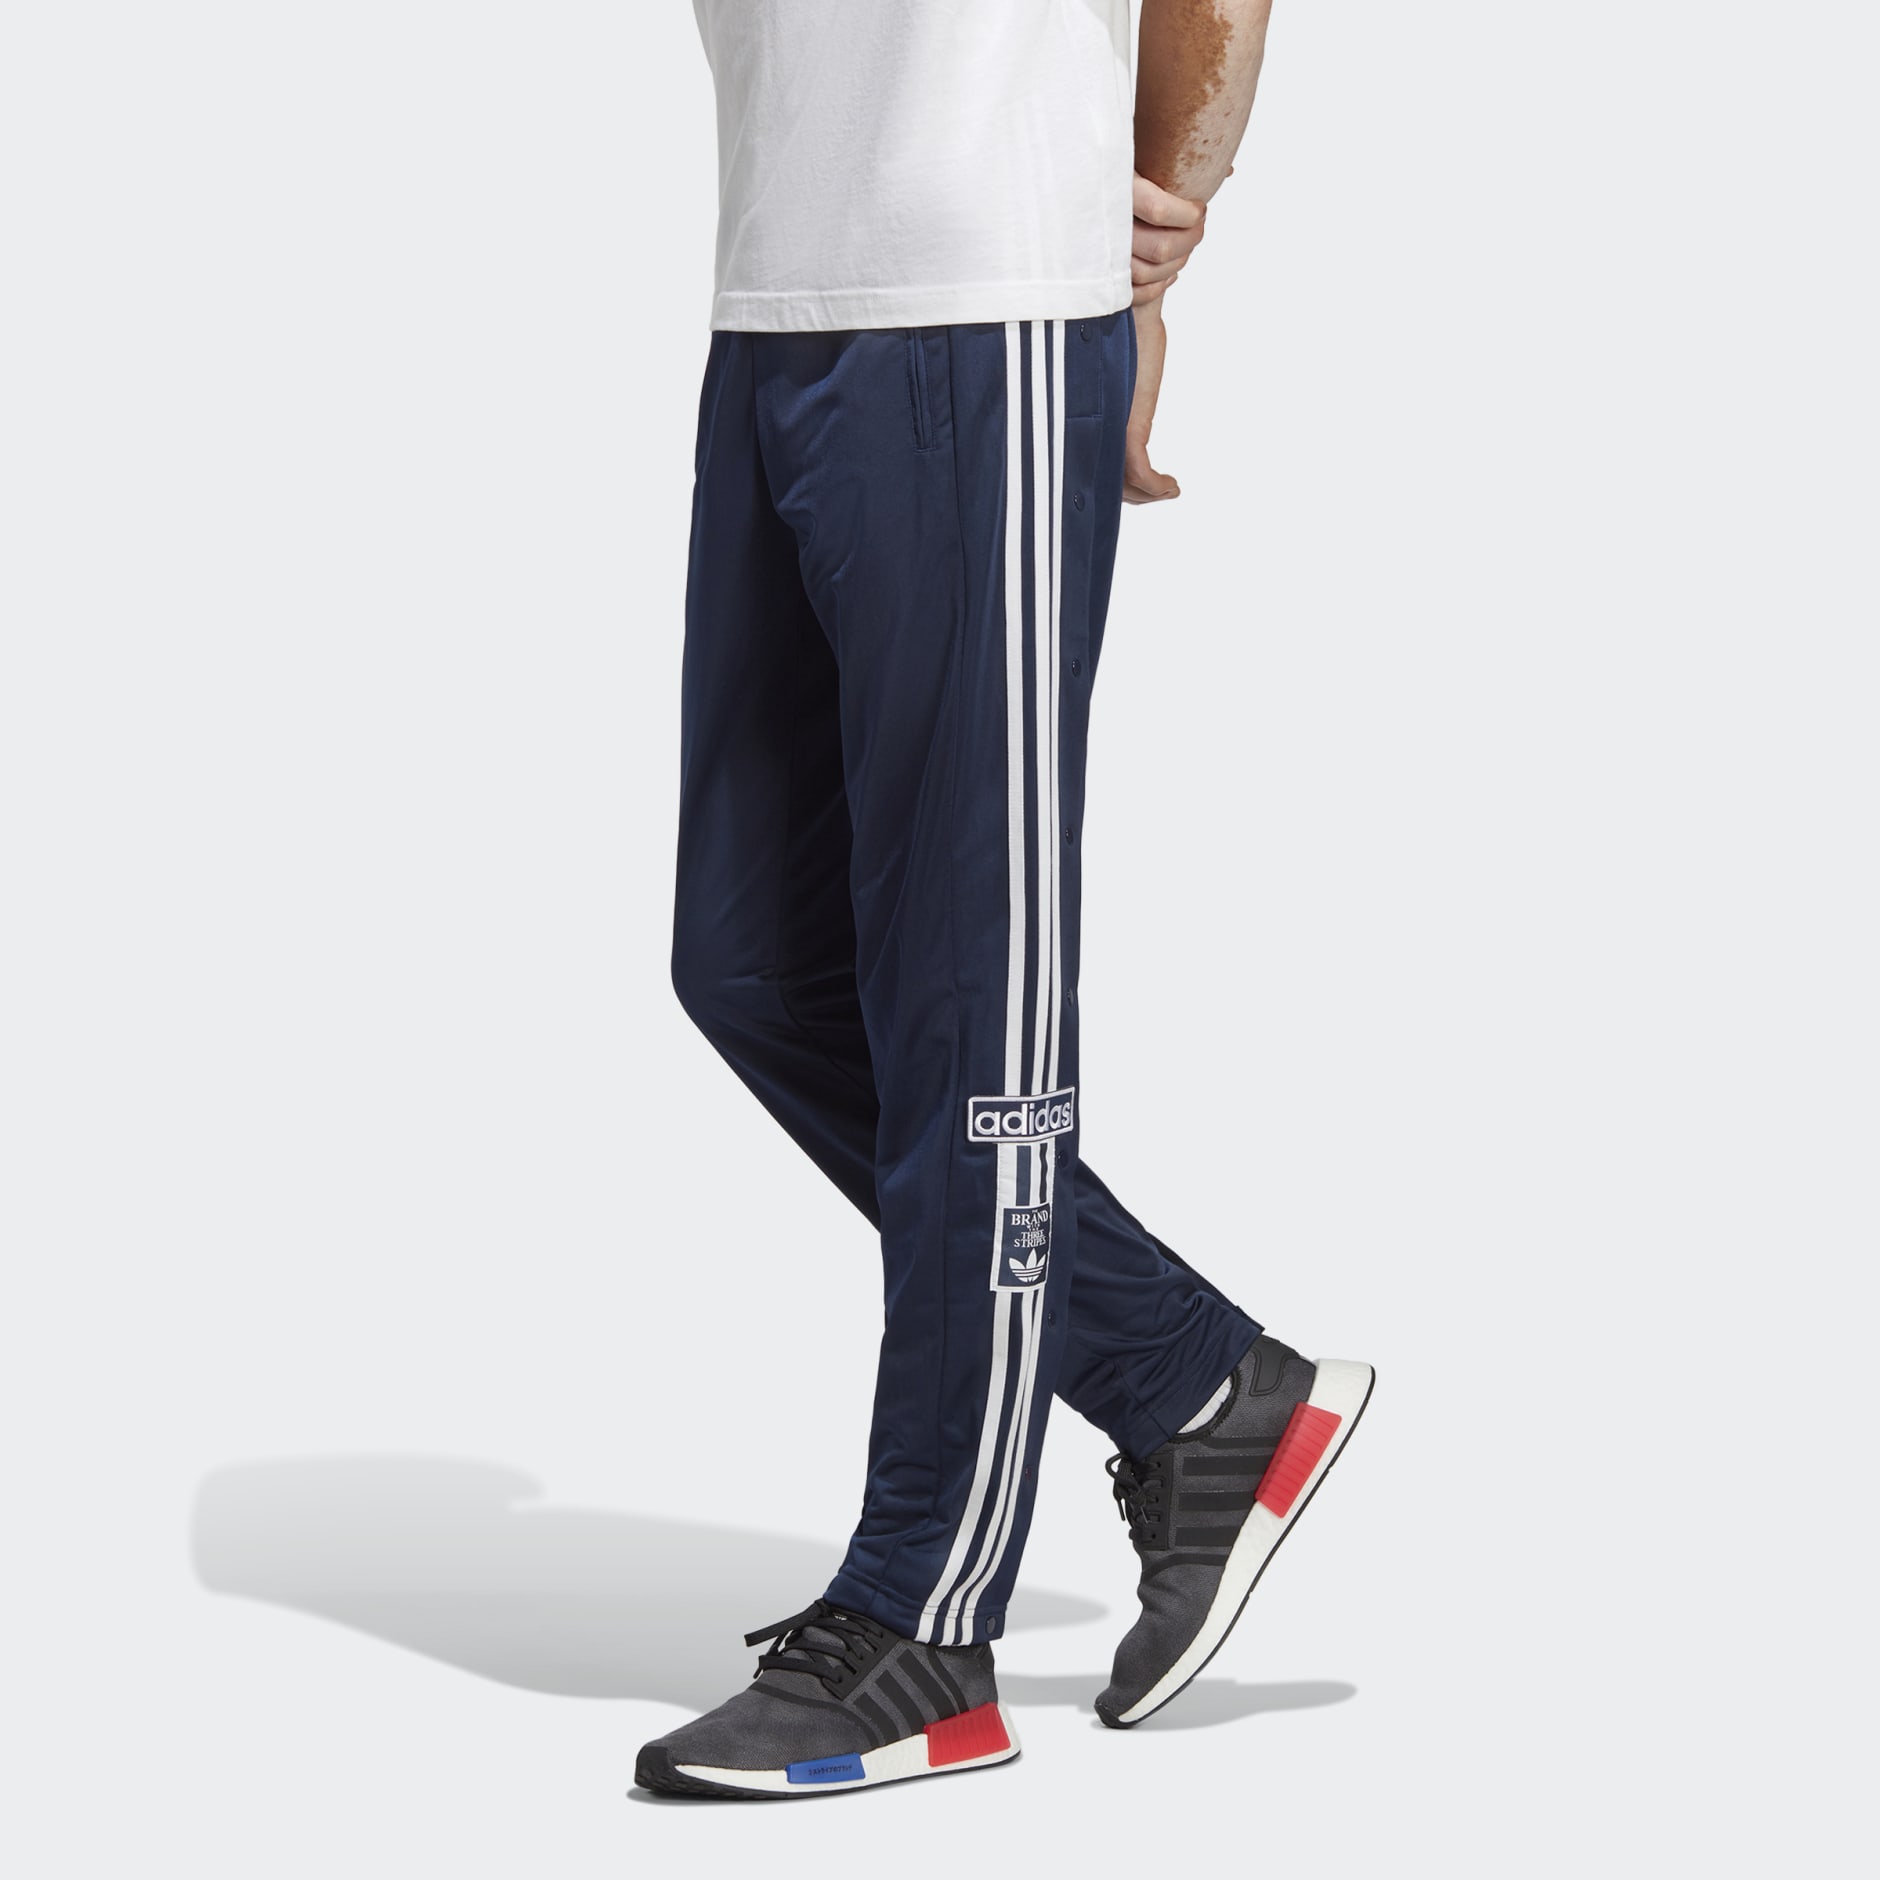 adidas Women's Originals Adibreak Og Track Pants (36- Black) in  Mahabubnagar at best price by Sannibha Aerofit Sports Sales &services and  Physiotherapy Clinic - Justdial